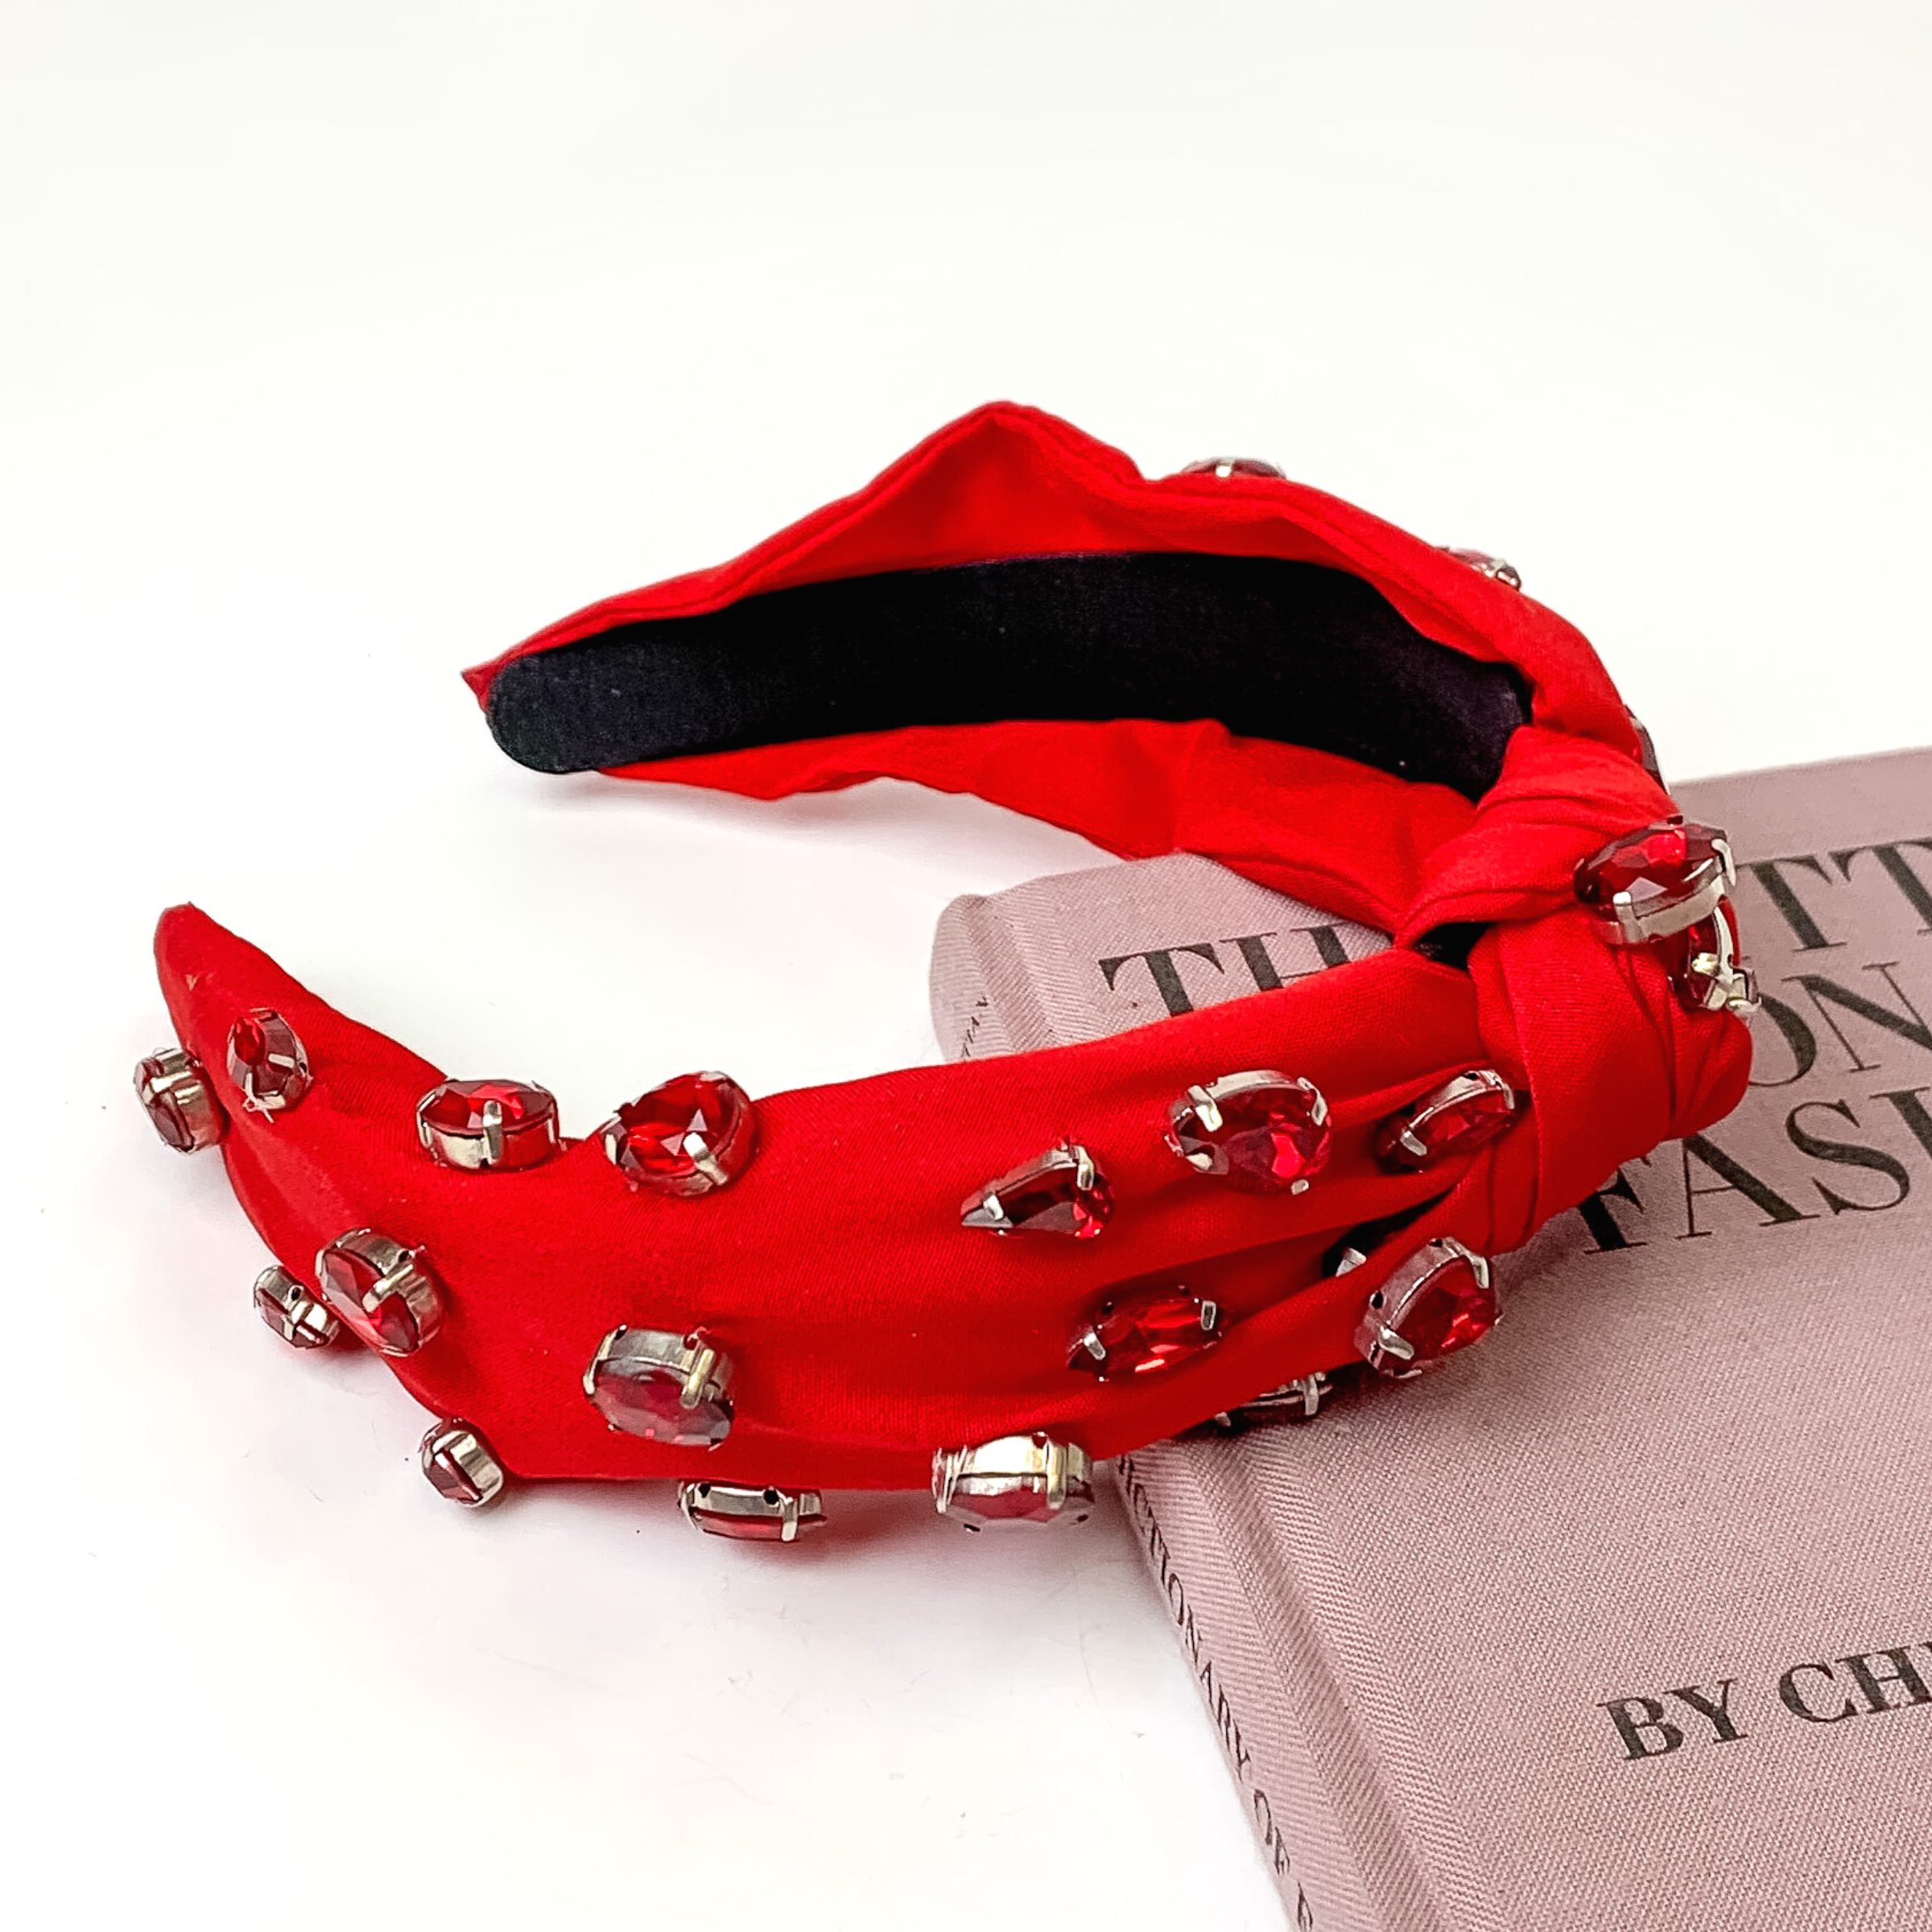 Red colored knot headband with different shaped red crystals. This headband is pictured partially laying on a mauve book on a white background.